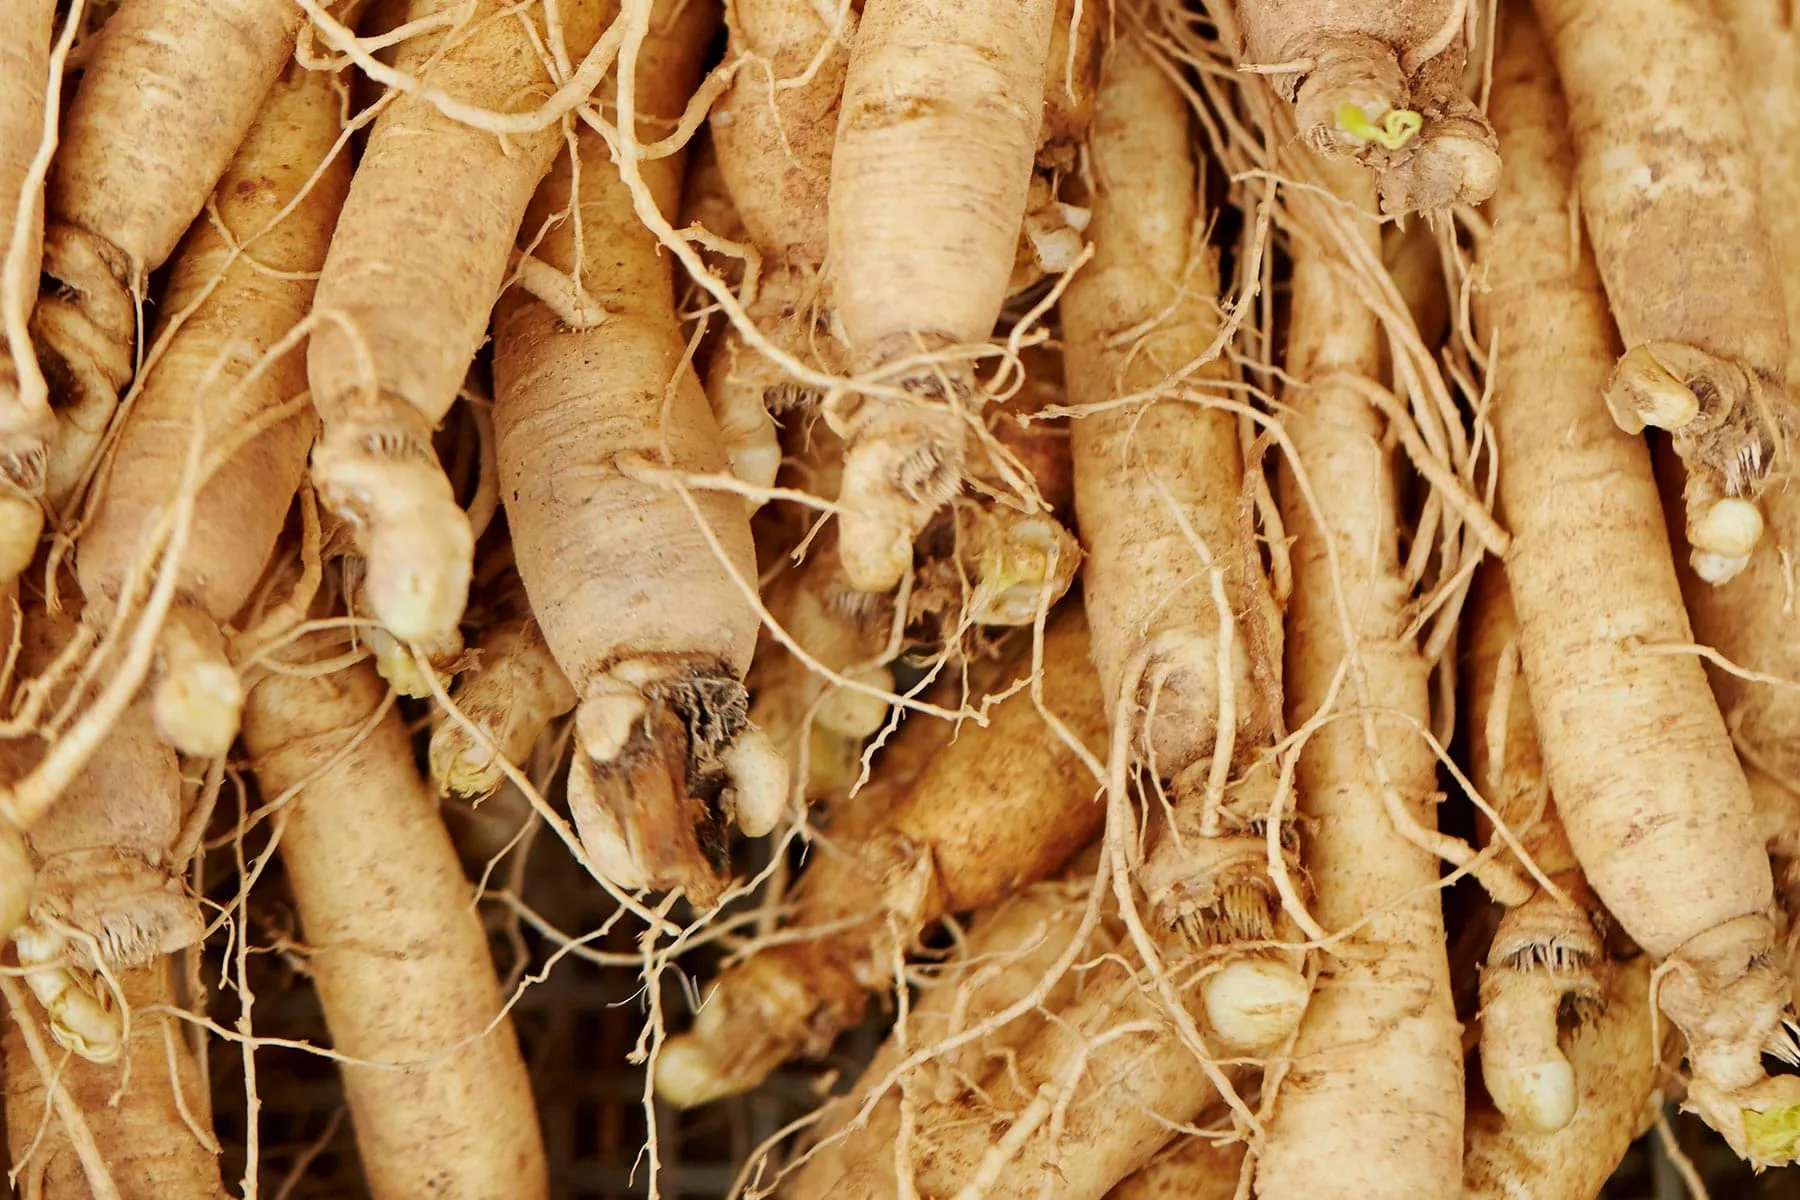 Ginseng: Benefits and Side Effects